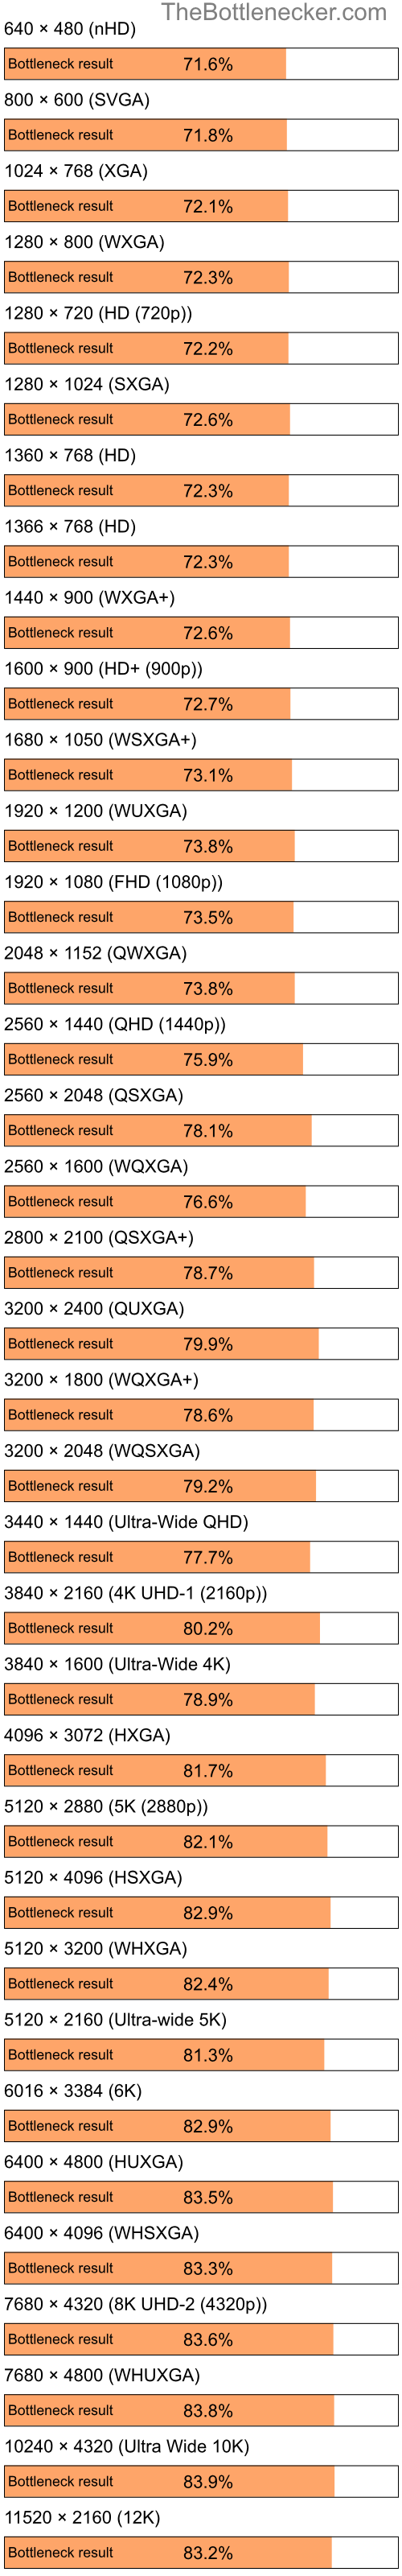 Bottleneck results by resolution for Intel Pentium 4 and NVIDIA GeForce 8400 in Graphic Card Intense Tasks